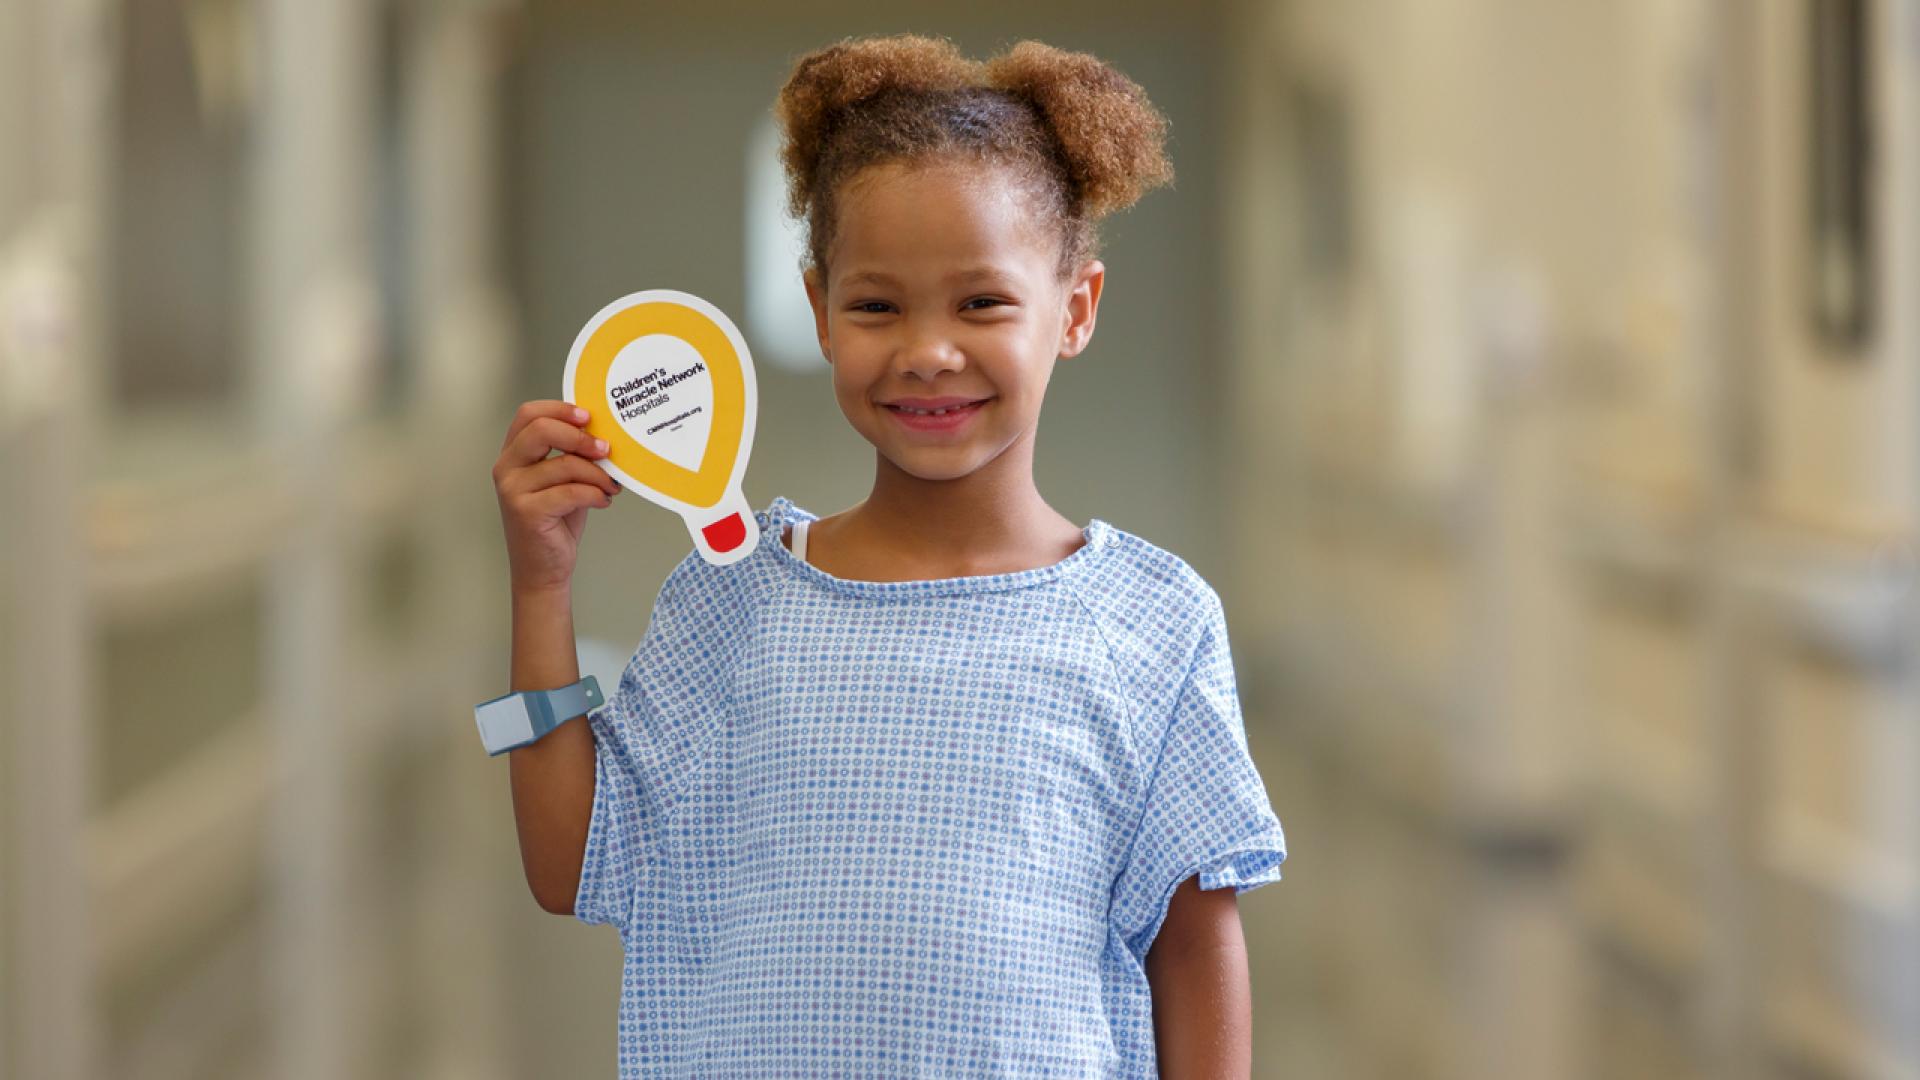 Children’s Miracle Network Hospitals®